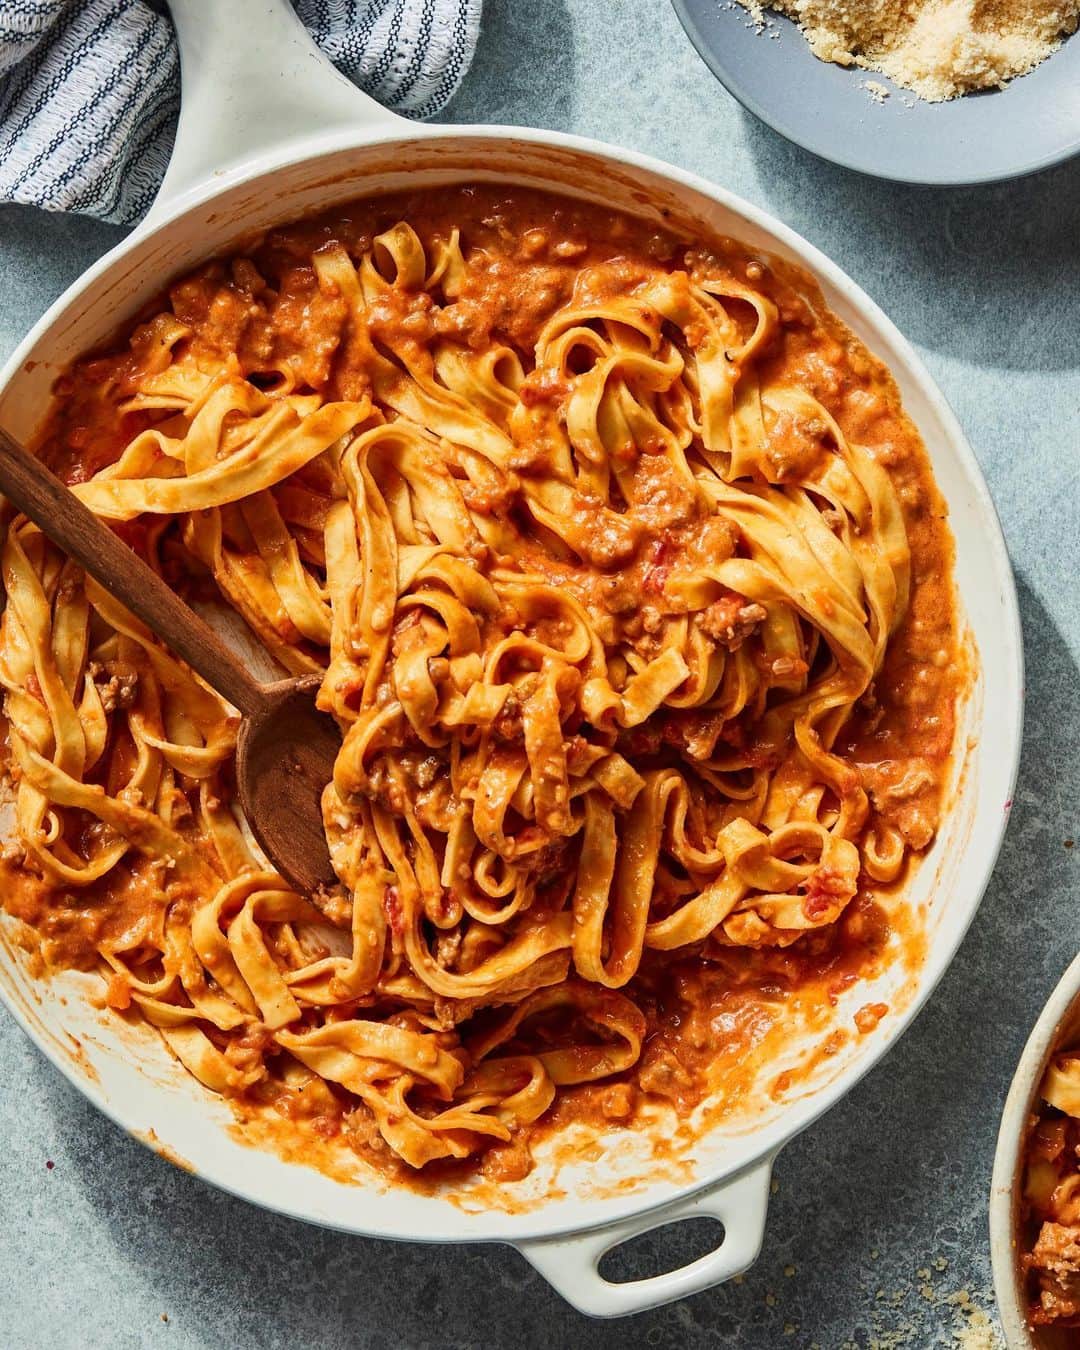 Gaby Dalkinのインスタグラム：「Easily the most epic Bolognese recipe you’ll ever make is up on the blog / linked in my profile! And if you were one of the few thousands of people to witness my typo this morning - YOU ARE WELCOME! 🤣Just a sneak peak into how we do food styling notes with my boos @adamfoodstyle + @mattarmendariz 🤦🏻‍♀️ https://whatsgabycooking.com/ragu-alla-bolognese/」